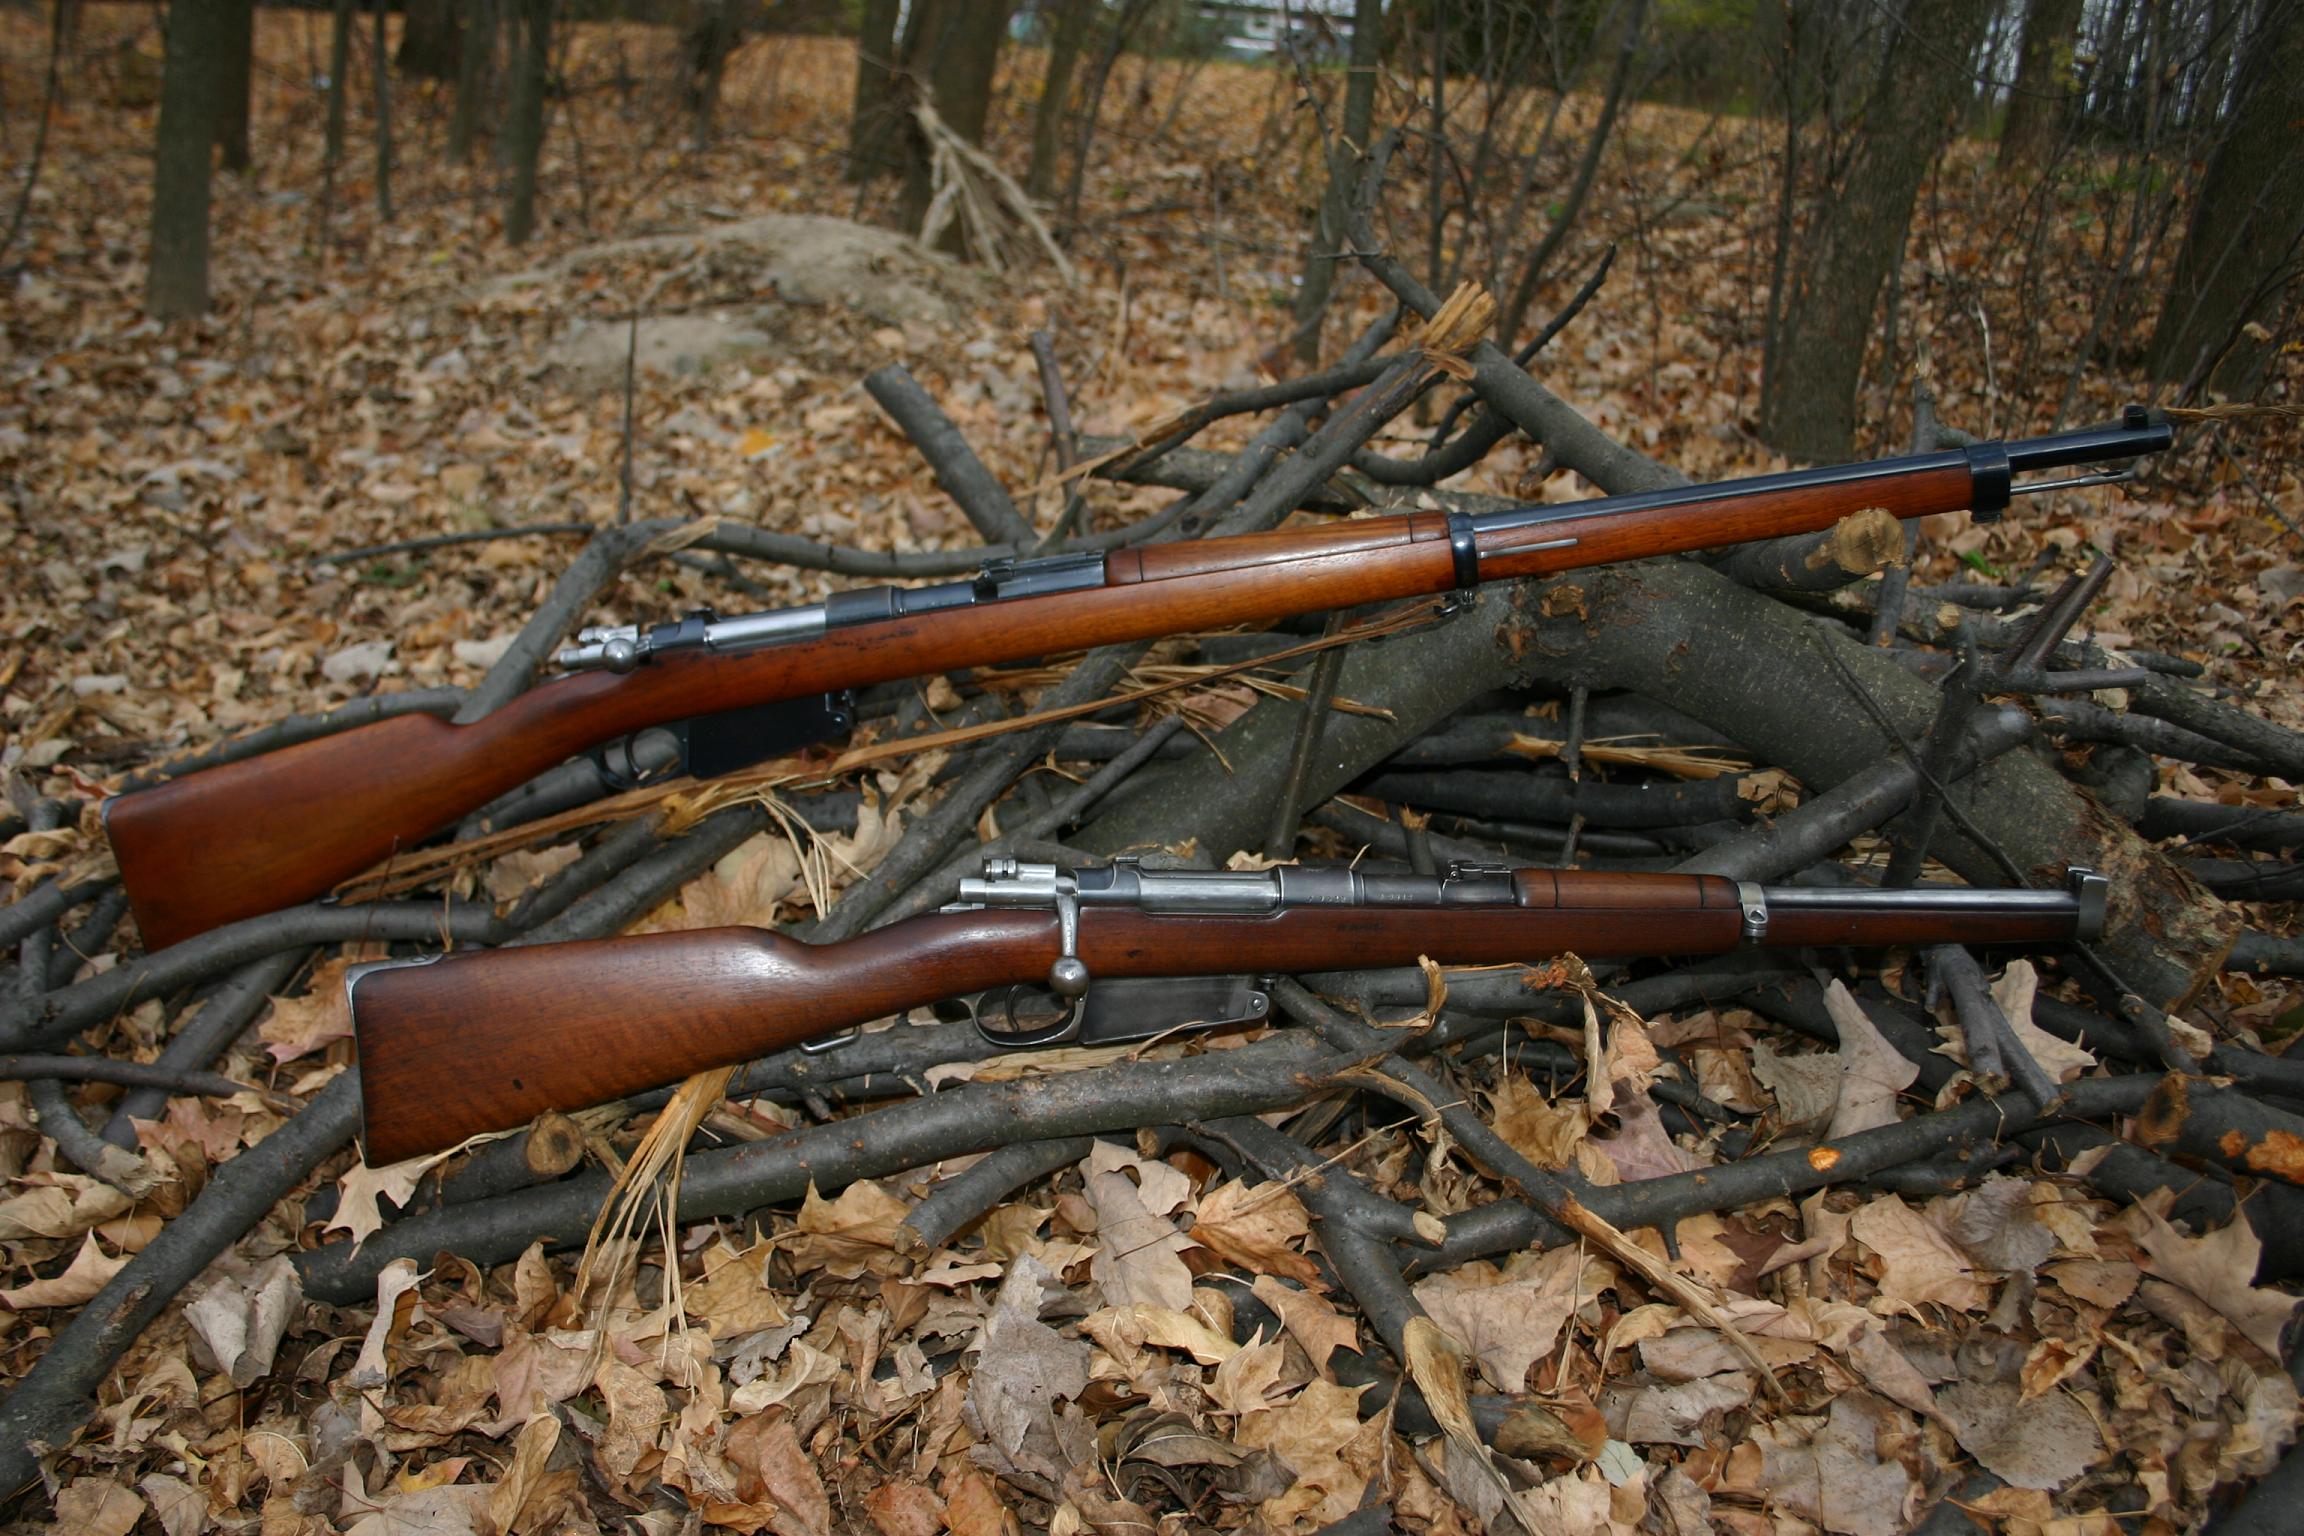 weapons, mauser rifle